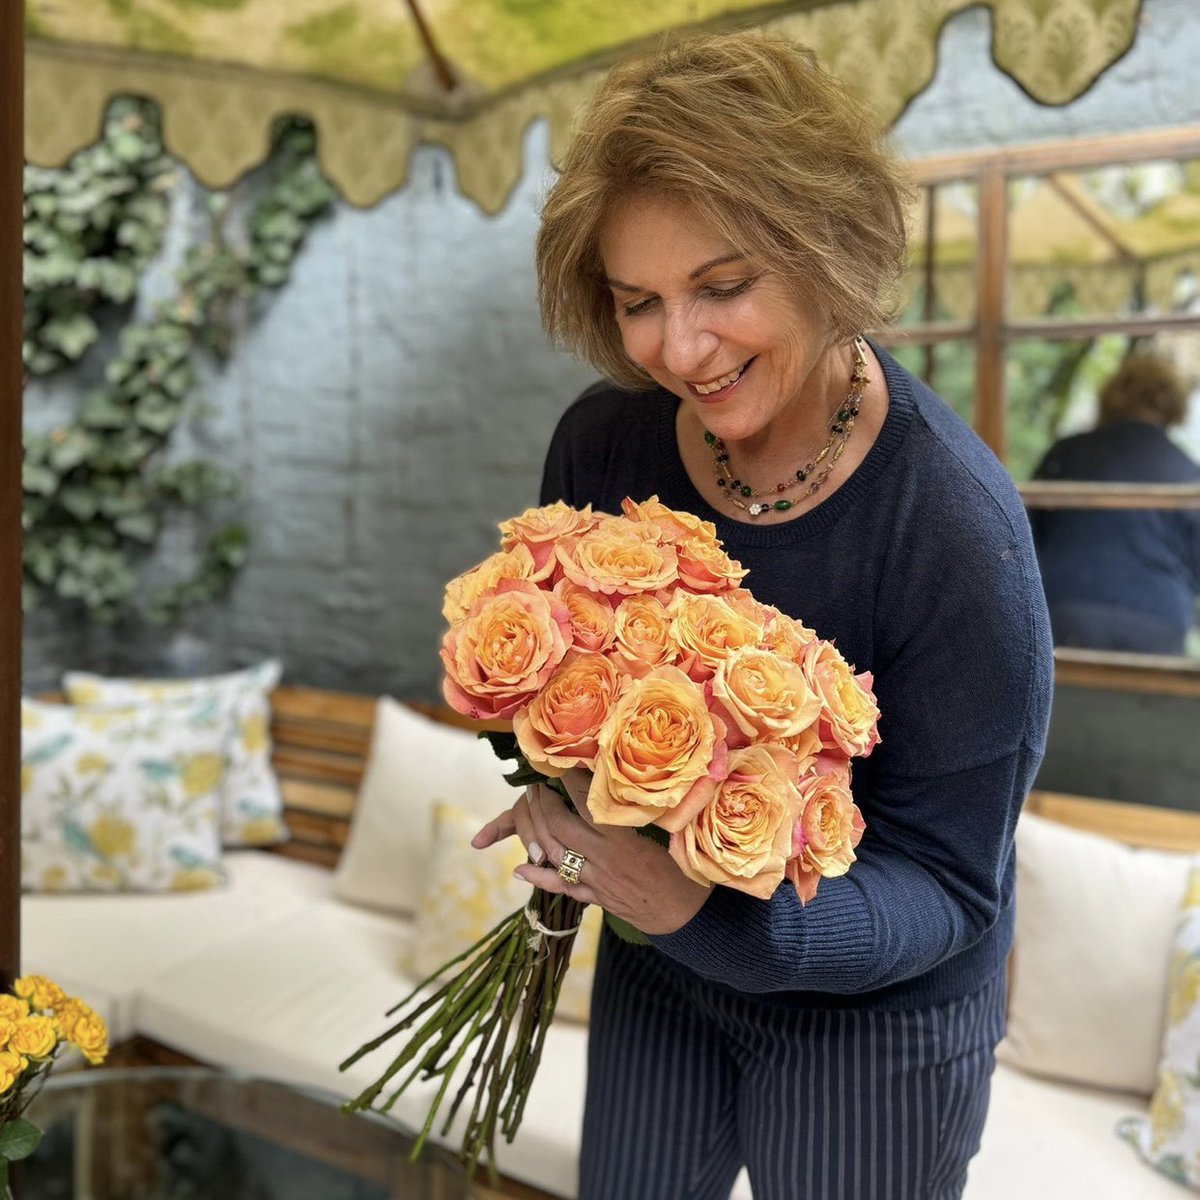 Shop online 💛 globalrose.com
Show Mom some love with farm-fresh blooms that’ll make her heart skip a beat!​✨💐🌸
•​
#flowers #freshflowers #onlineflowers  #quote #globalrose #mothersday #mom